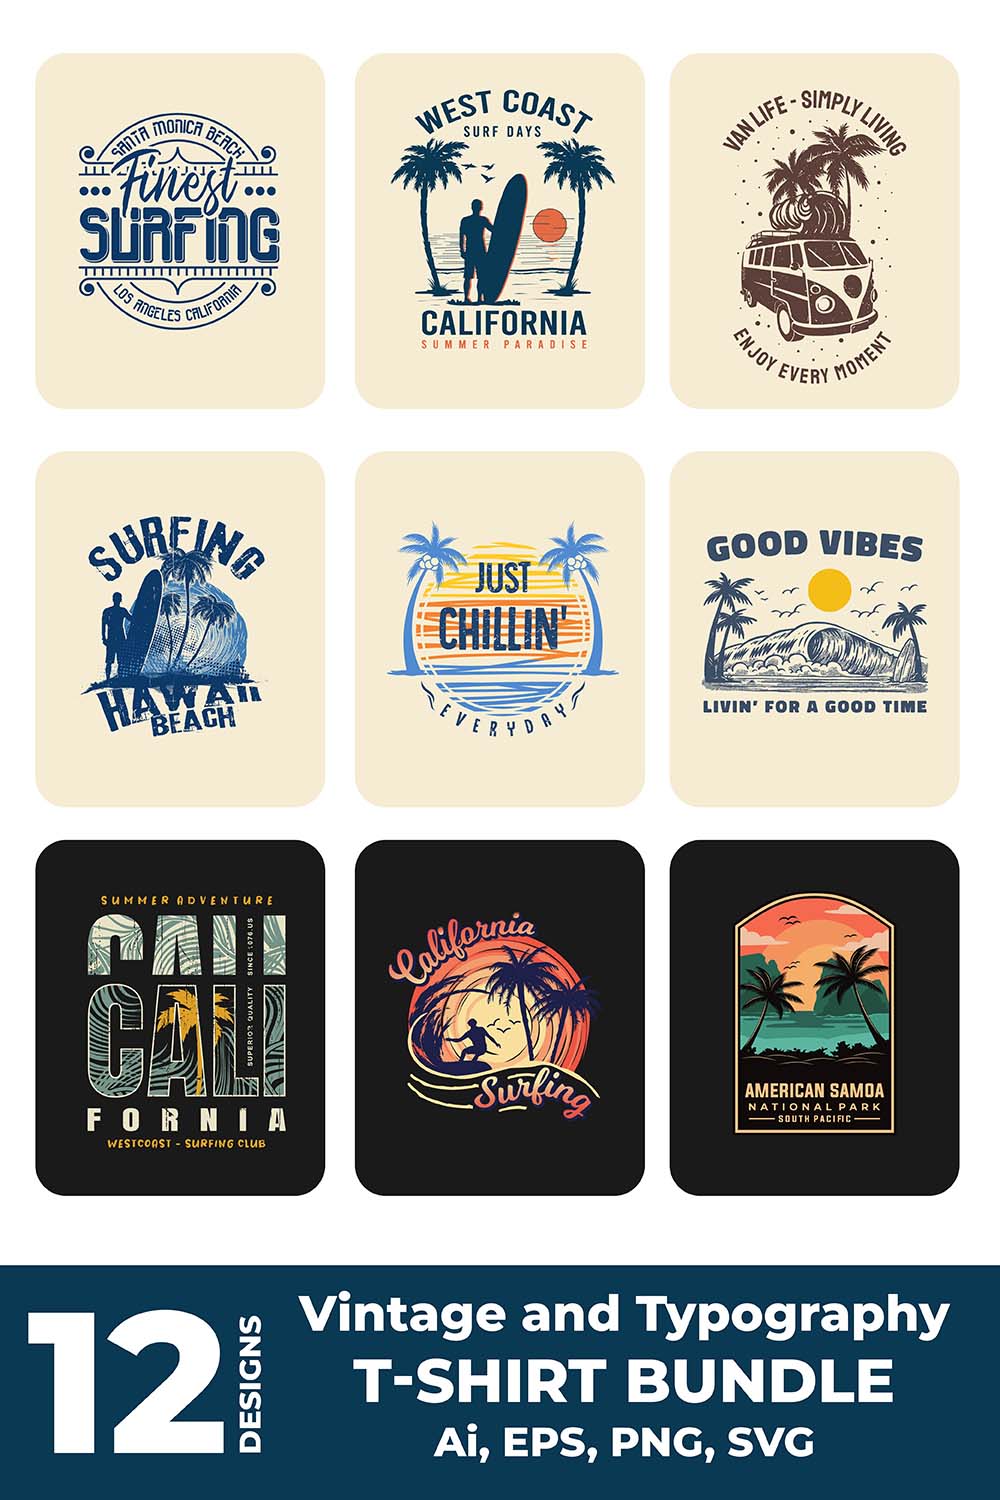 Vintage and typography t-shirt designs bundle pinterest preview image.